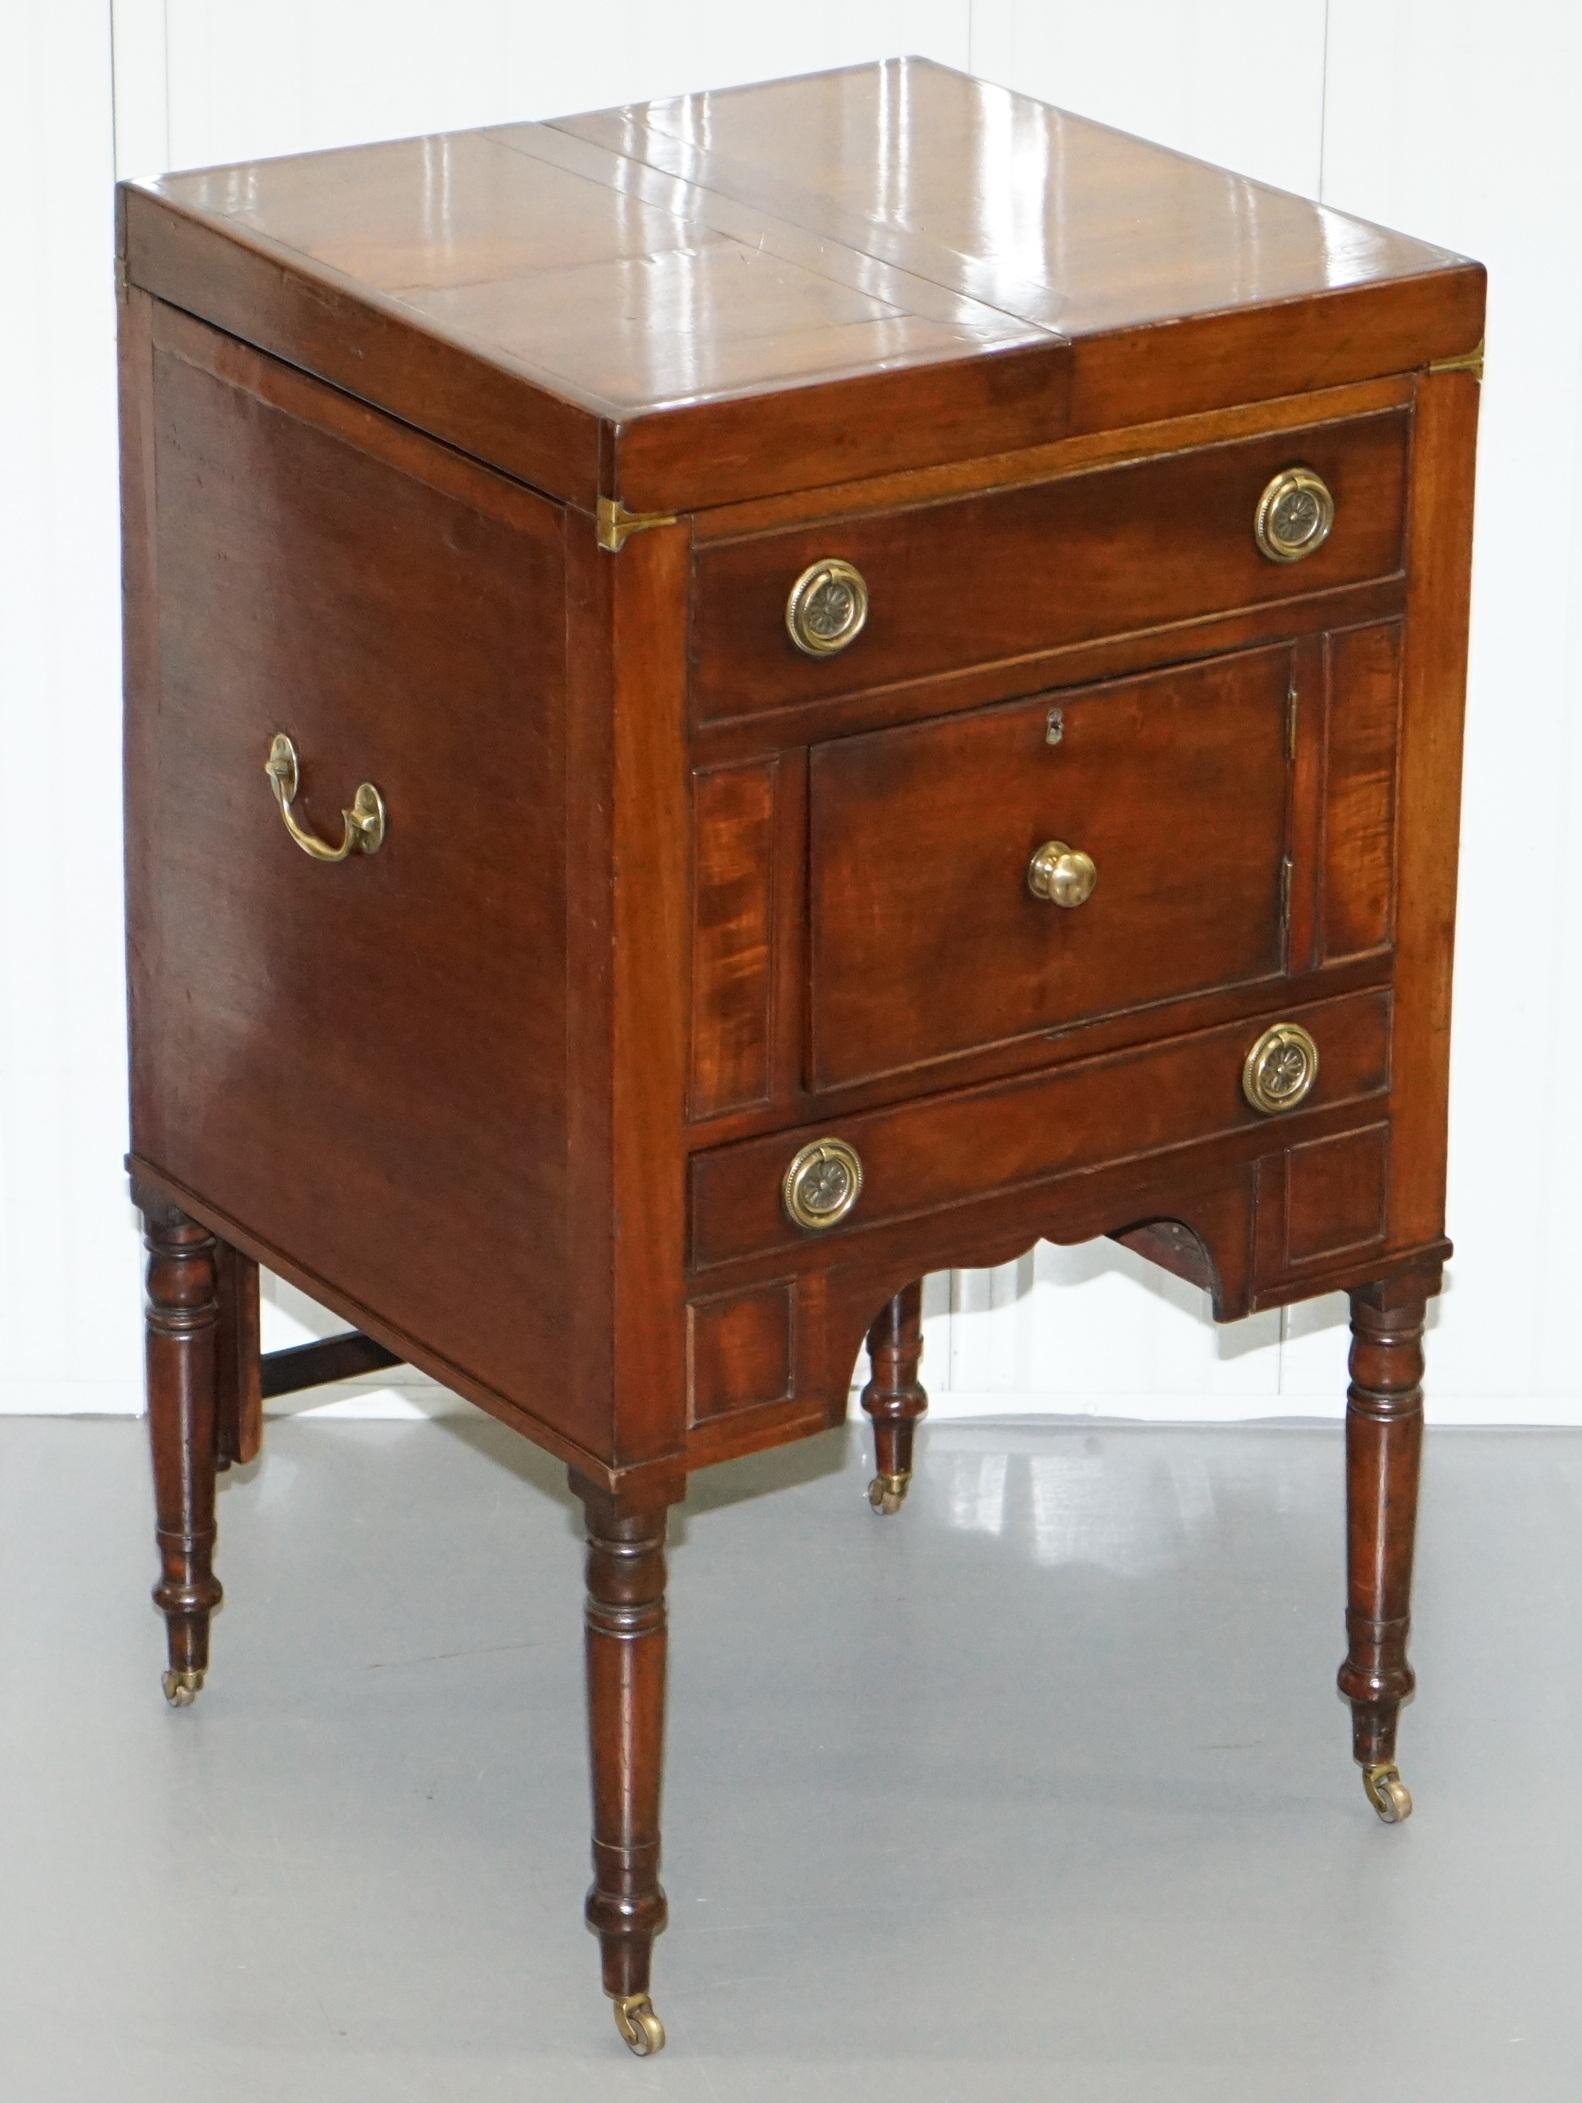 We are delighted to this very rare 19th century Military officers Campaign wash stand with drawers and cupboard on original castors

A very well made and collectible piece of furniture, everything is present and correct, the mirrors out and holds